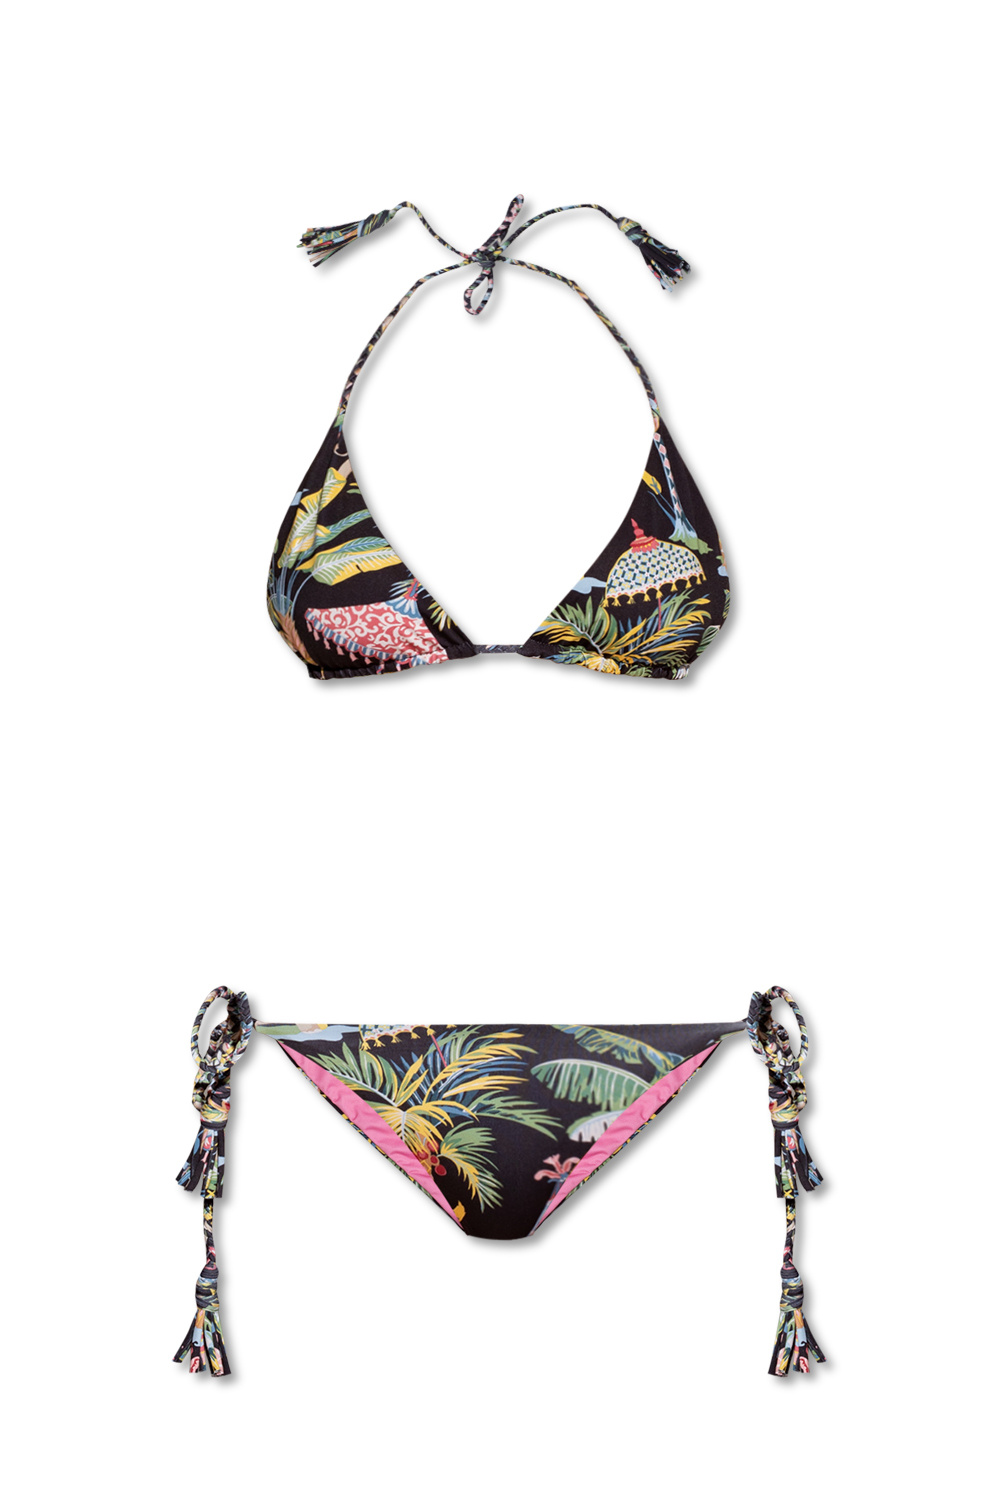 Red Valentino Two-piece swimsuit